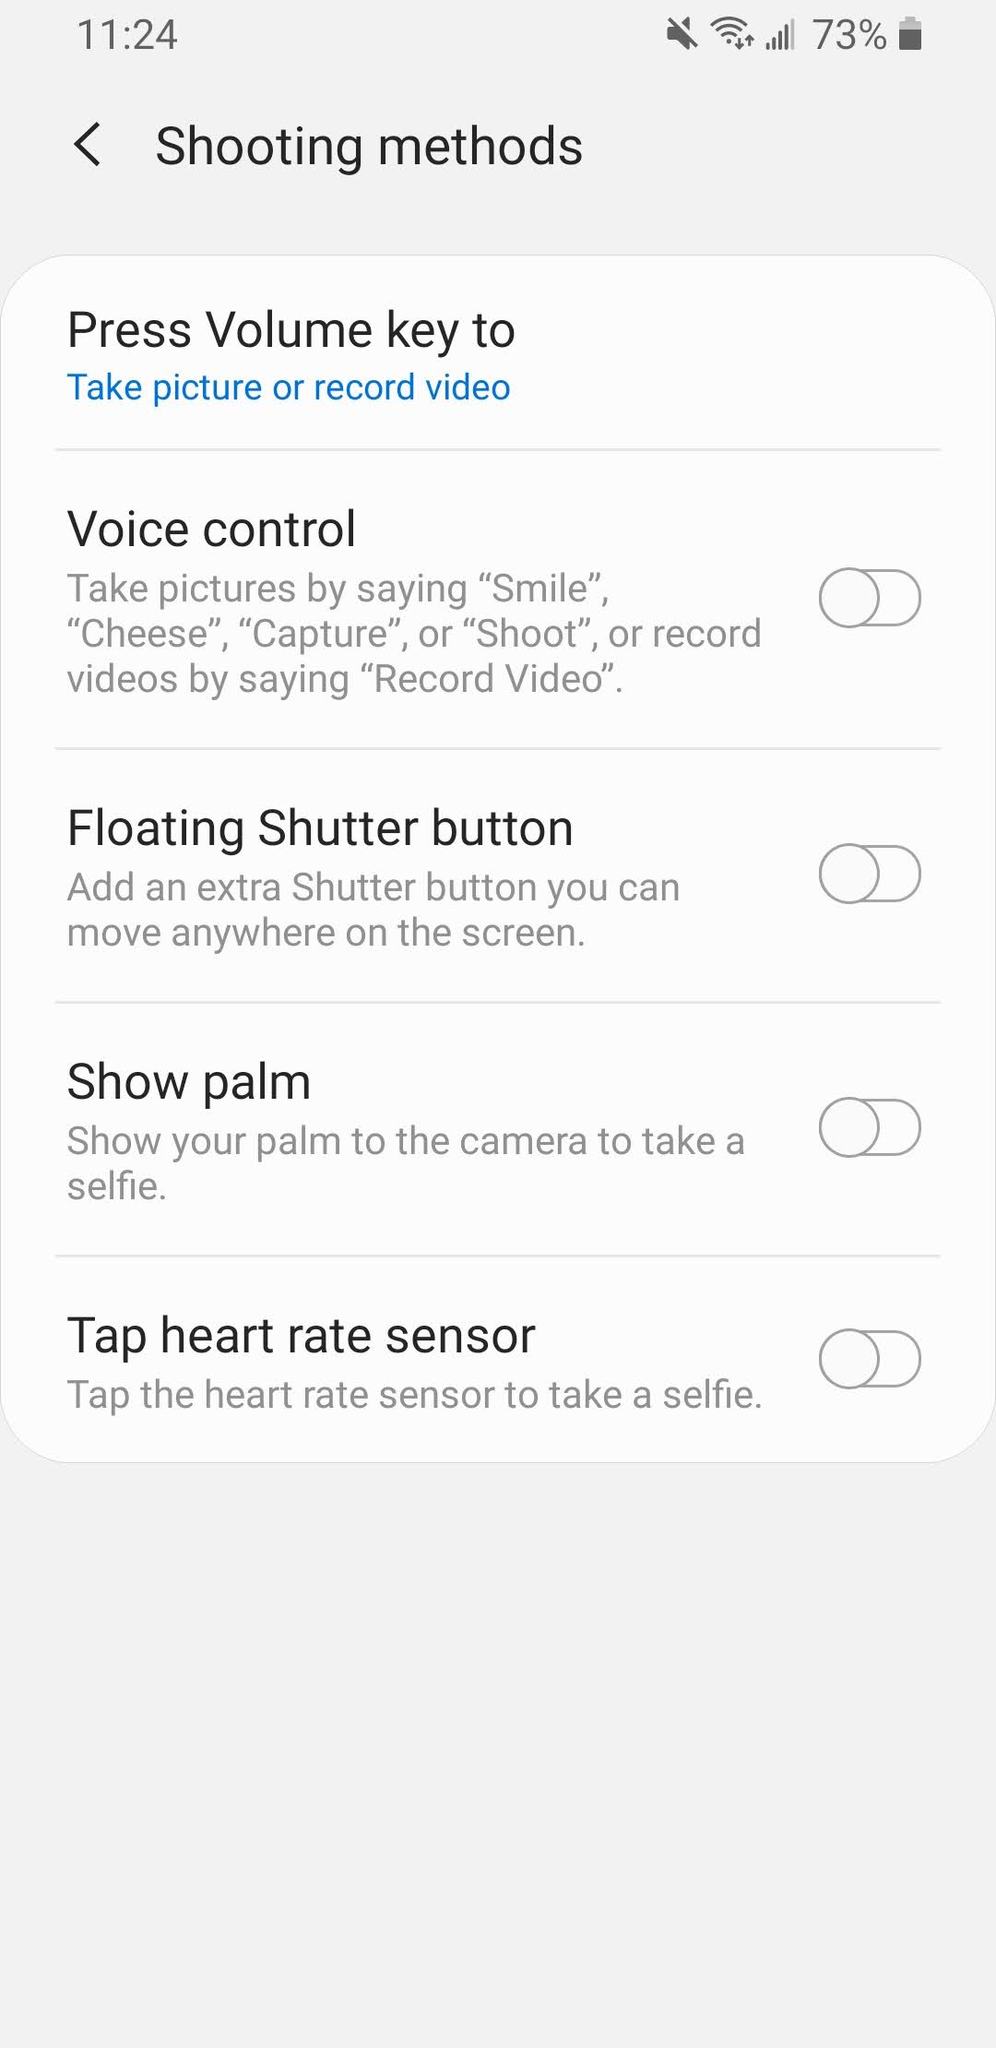 How to take a hands-free selfie on your Samsung Galaxy S or Note phone